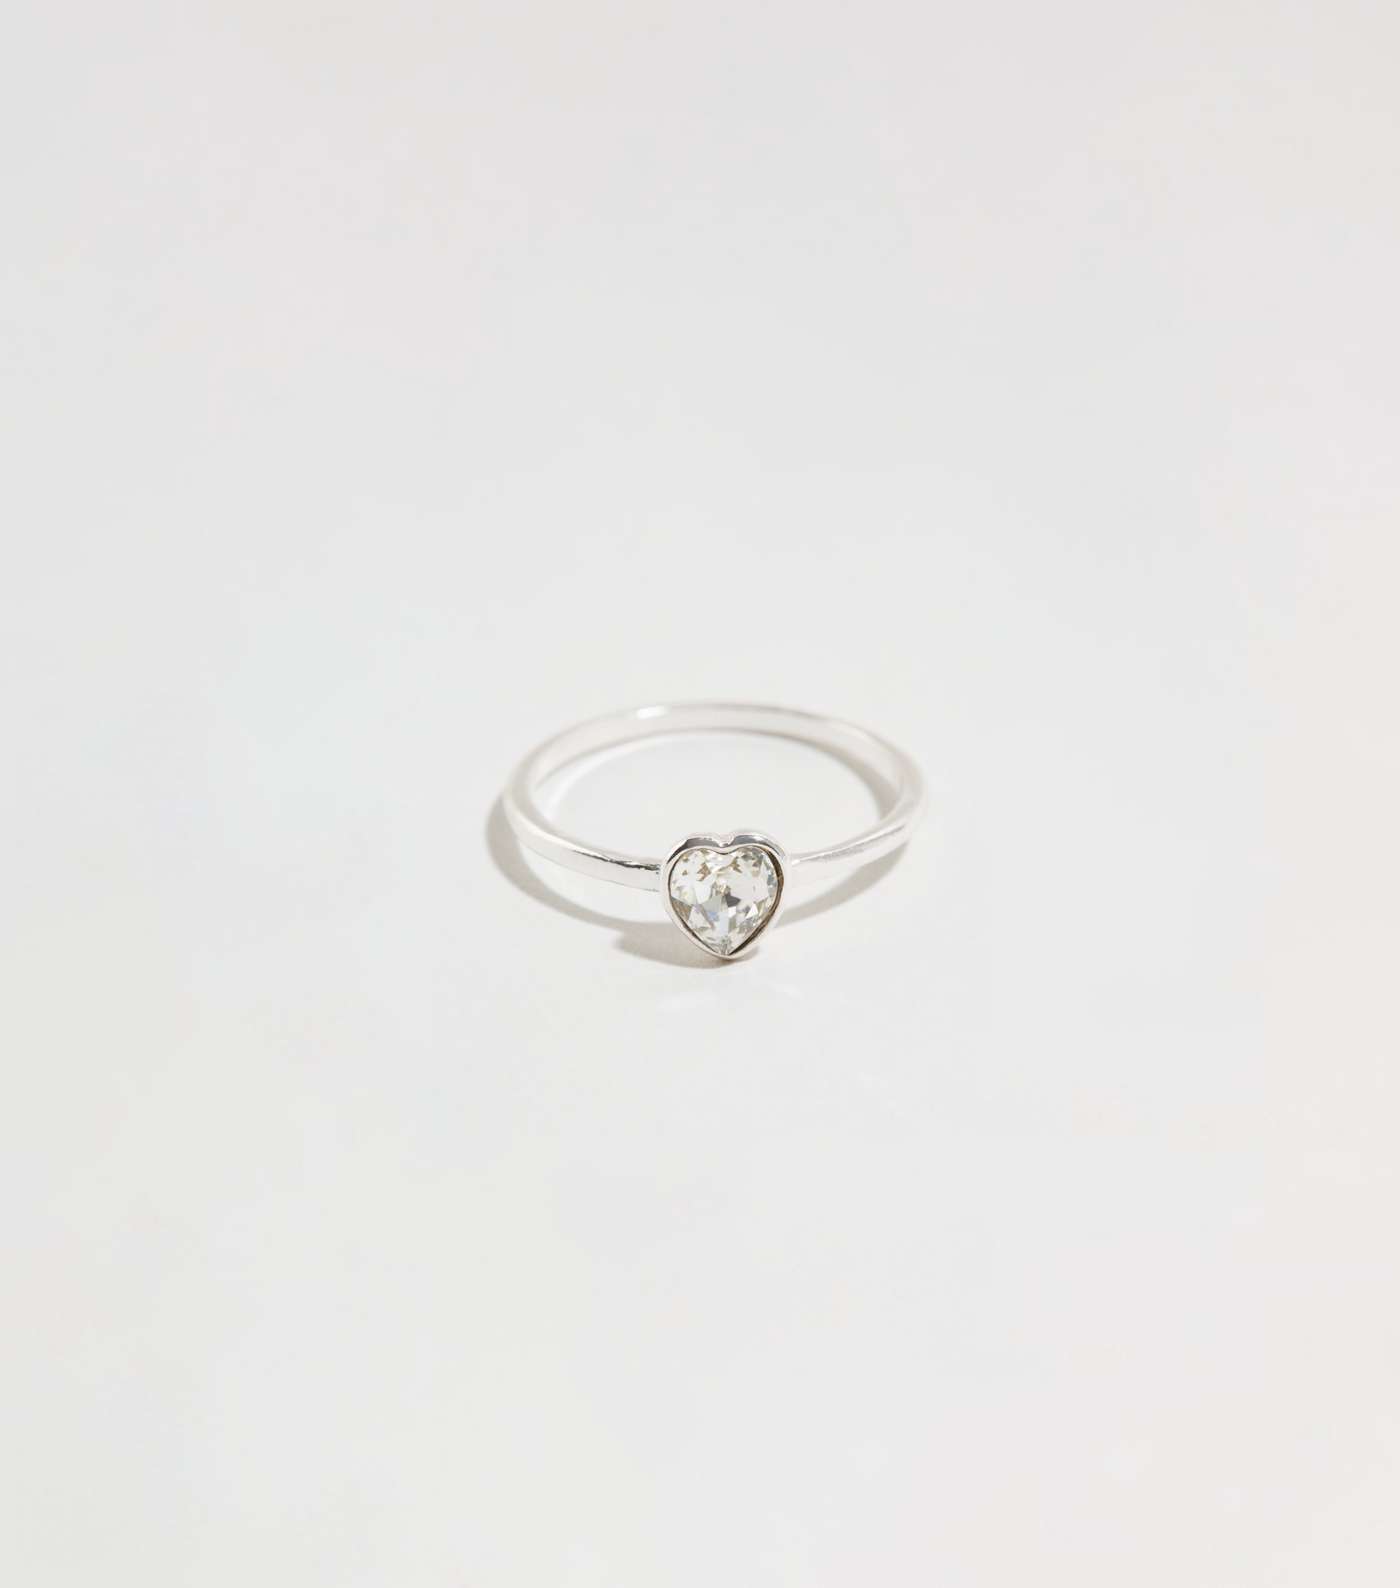 Silver Heart Ring with Crystals from Swarovski® Image 2